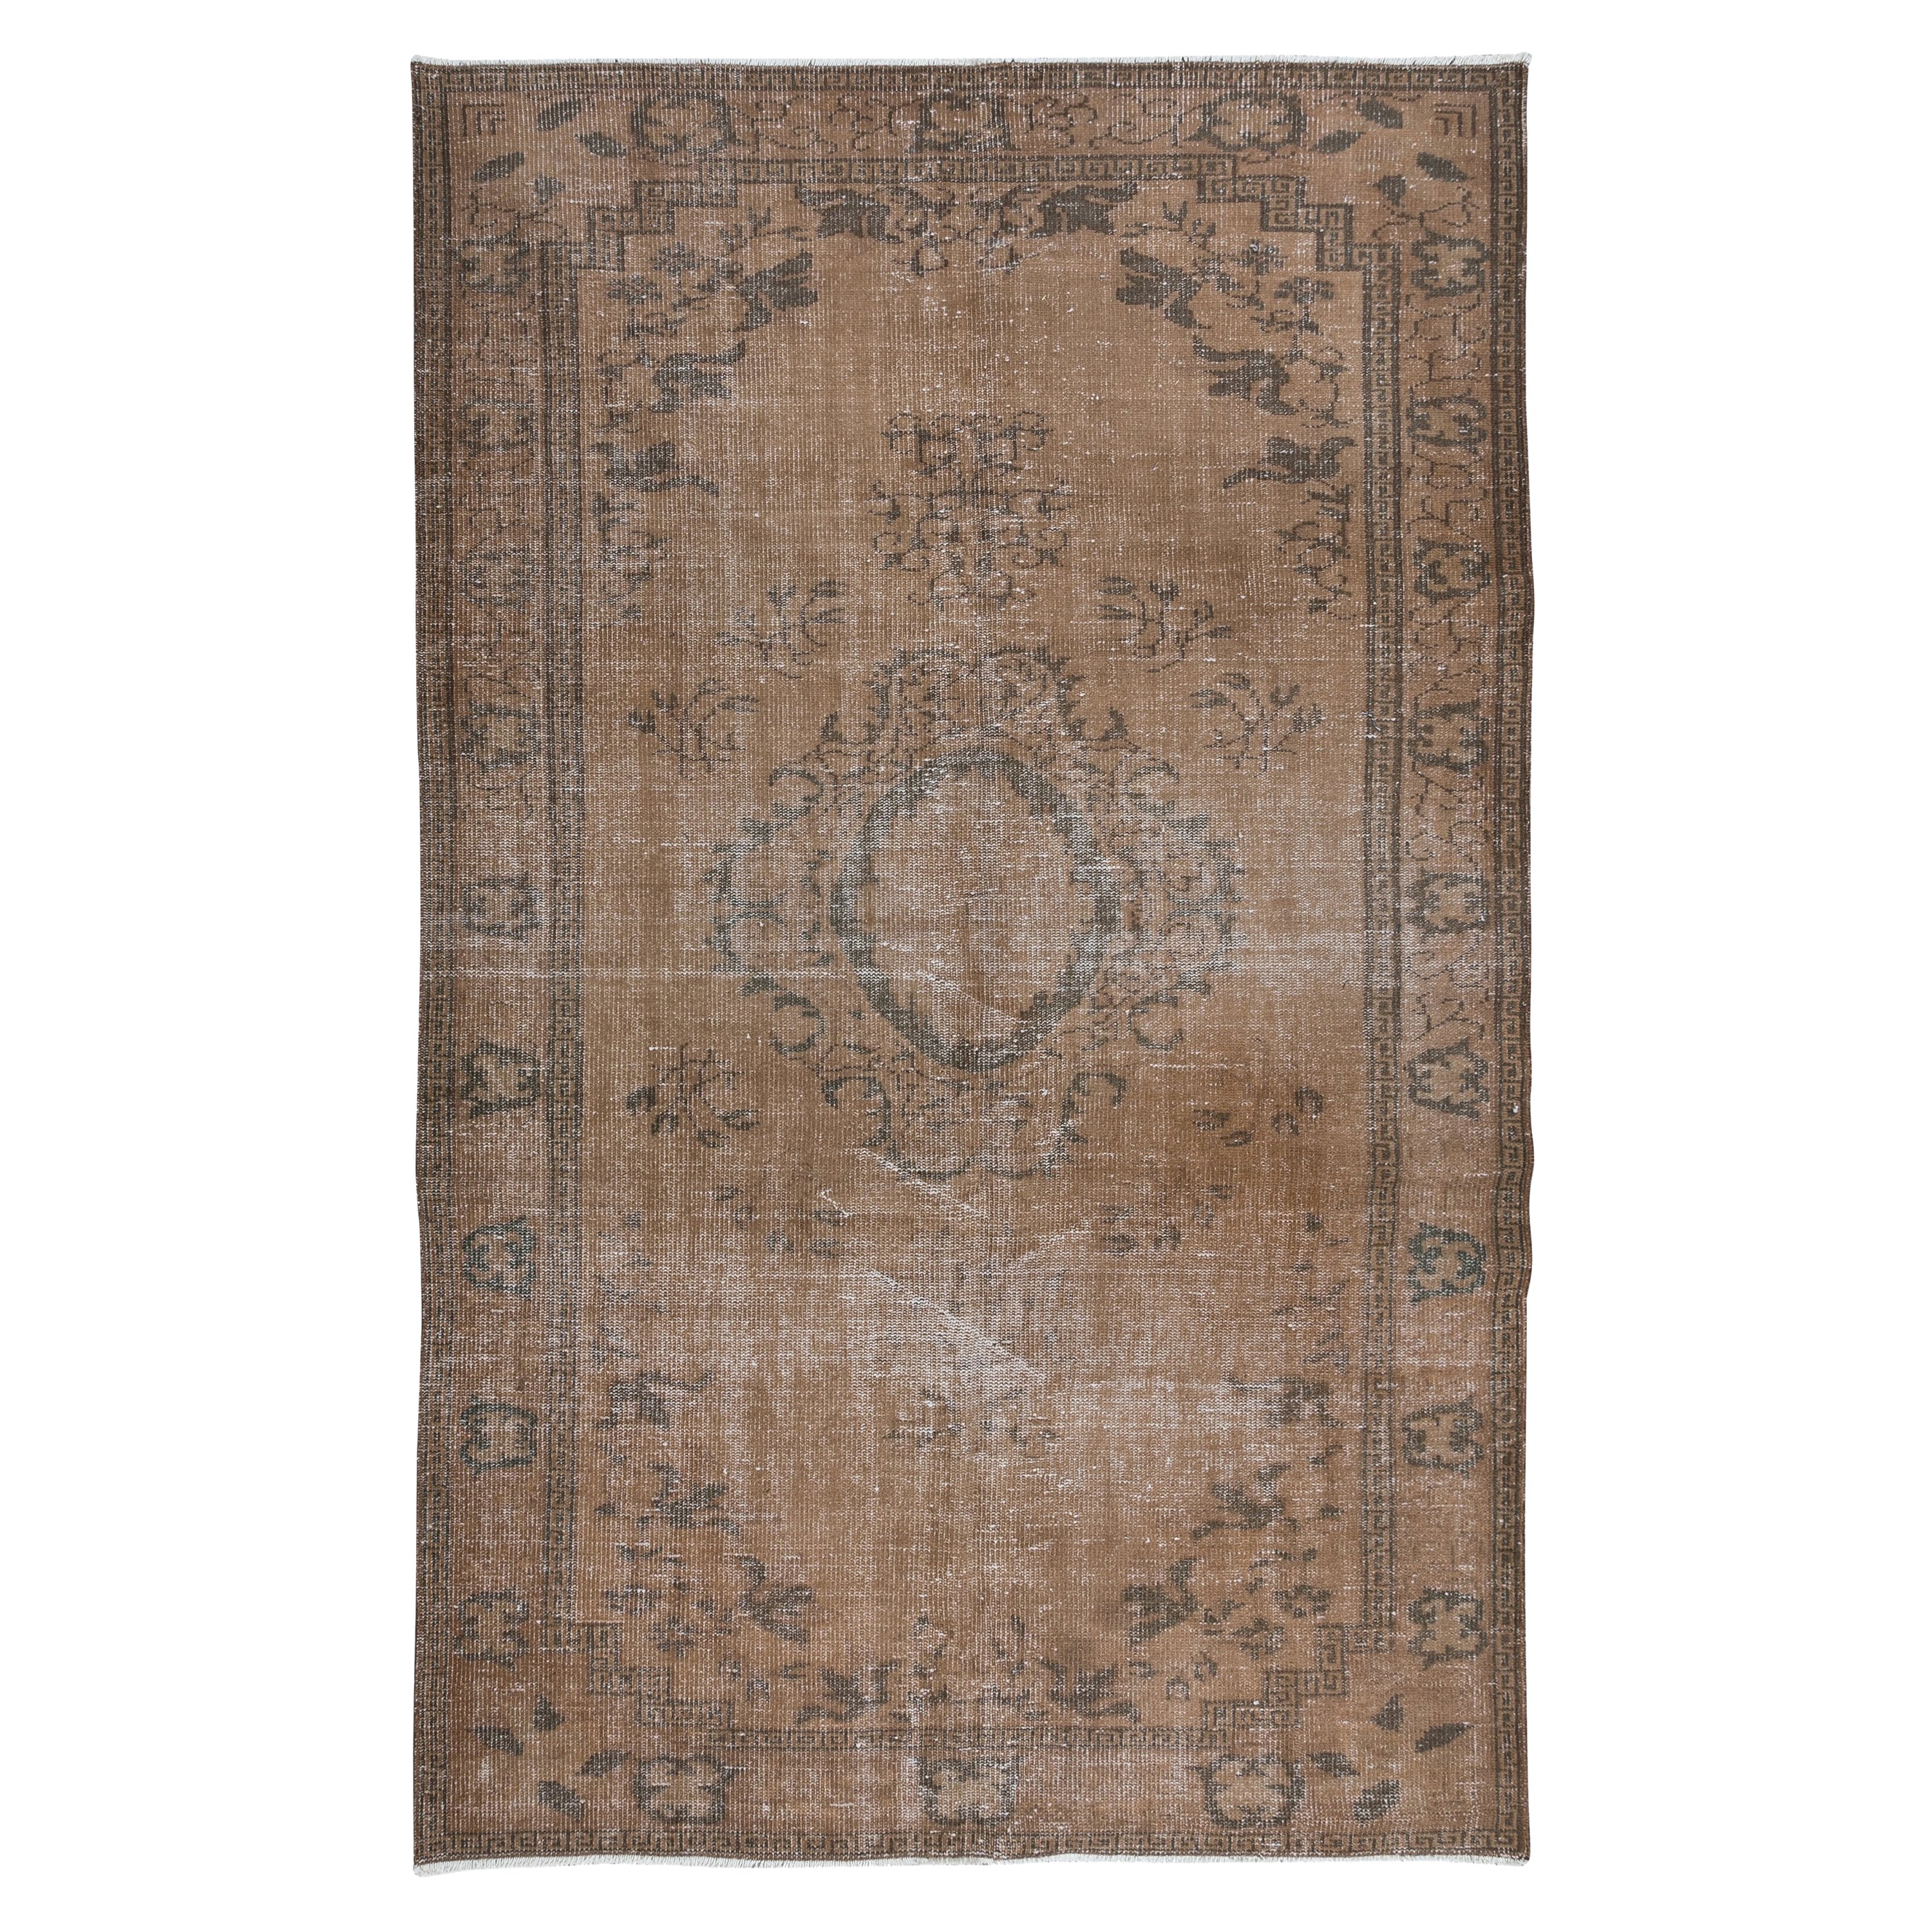 5.8x9 Ft Modern Brown Handmade Area Rug, Contemporary Turkish Wool Carpet For Sale